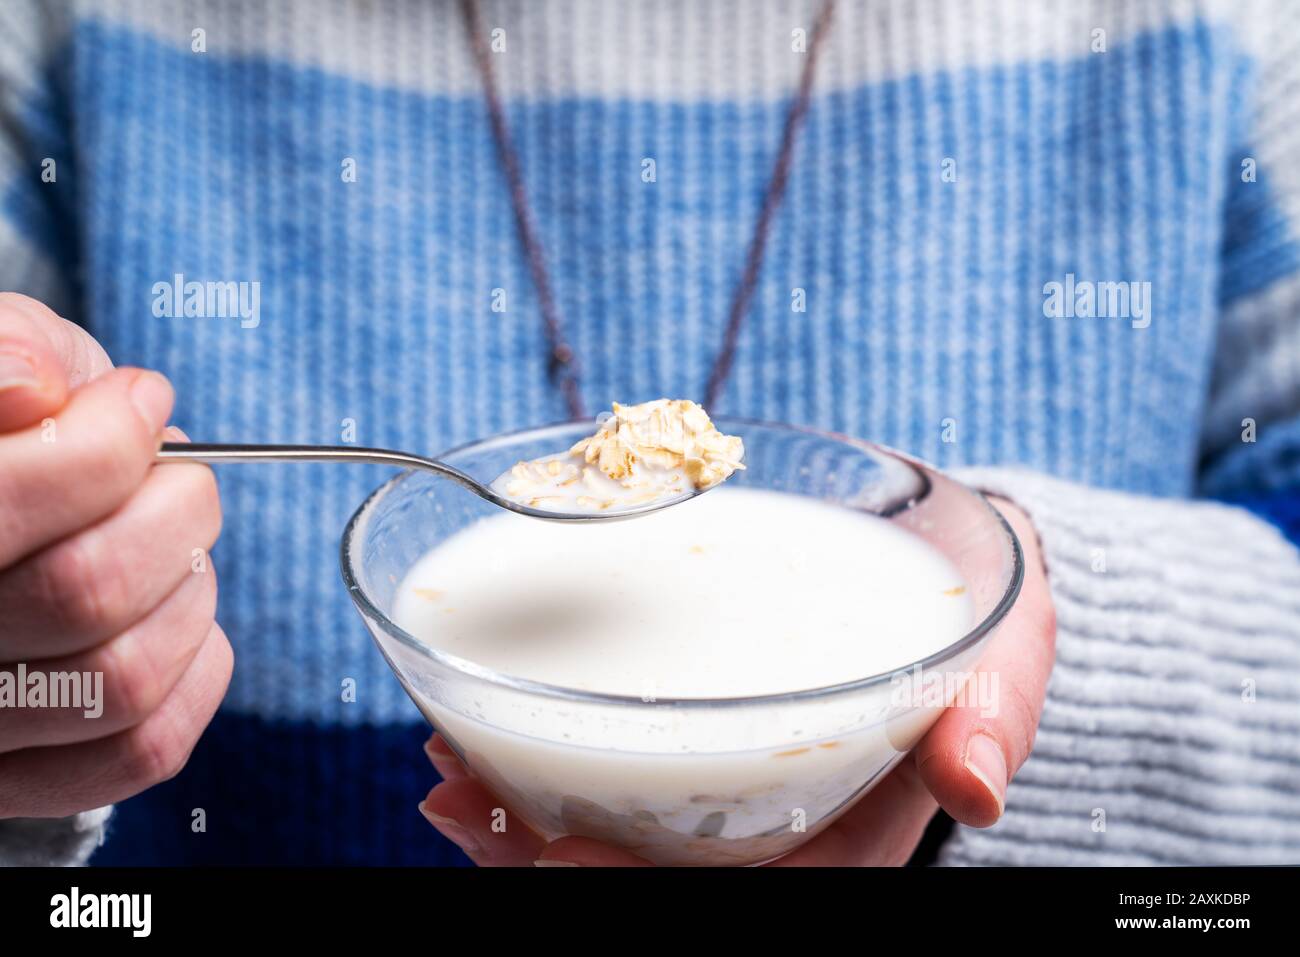 woman is eating a bowl of cereal rolled oats for breakfast. Diet and healthy living concept Stock Photo